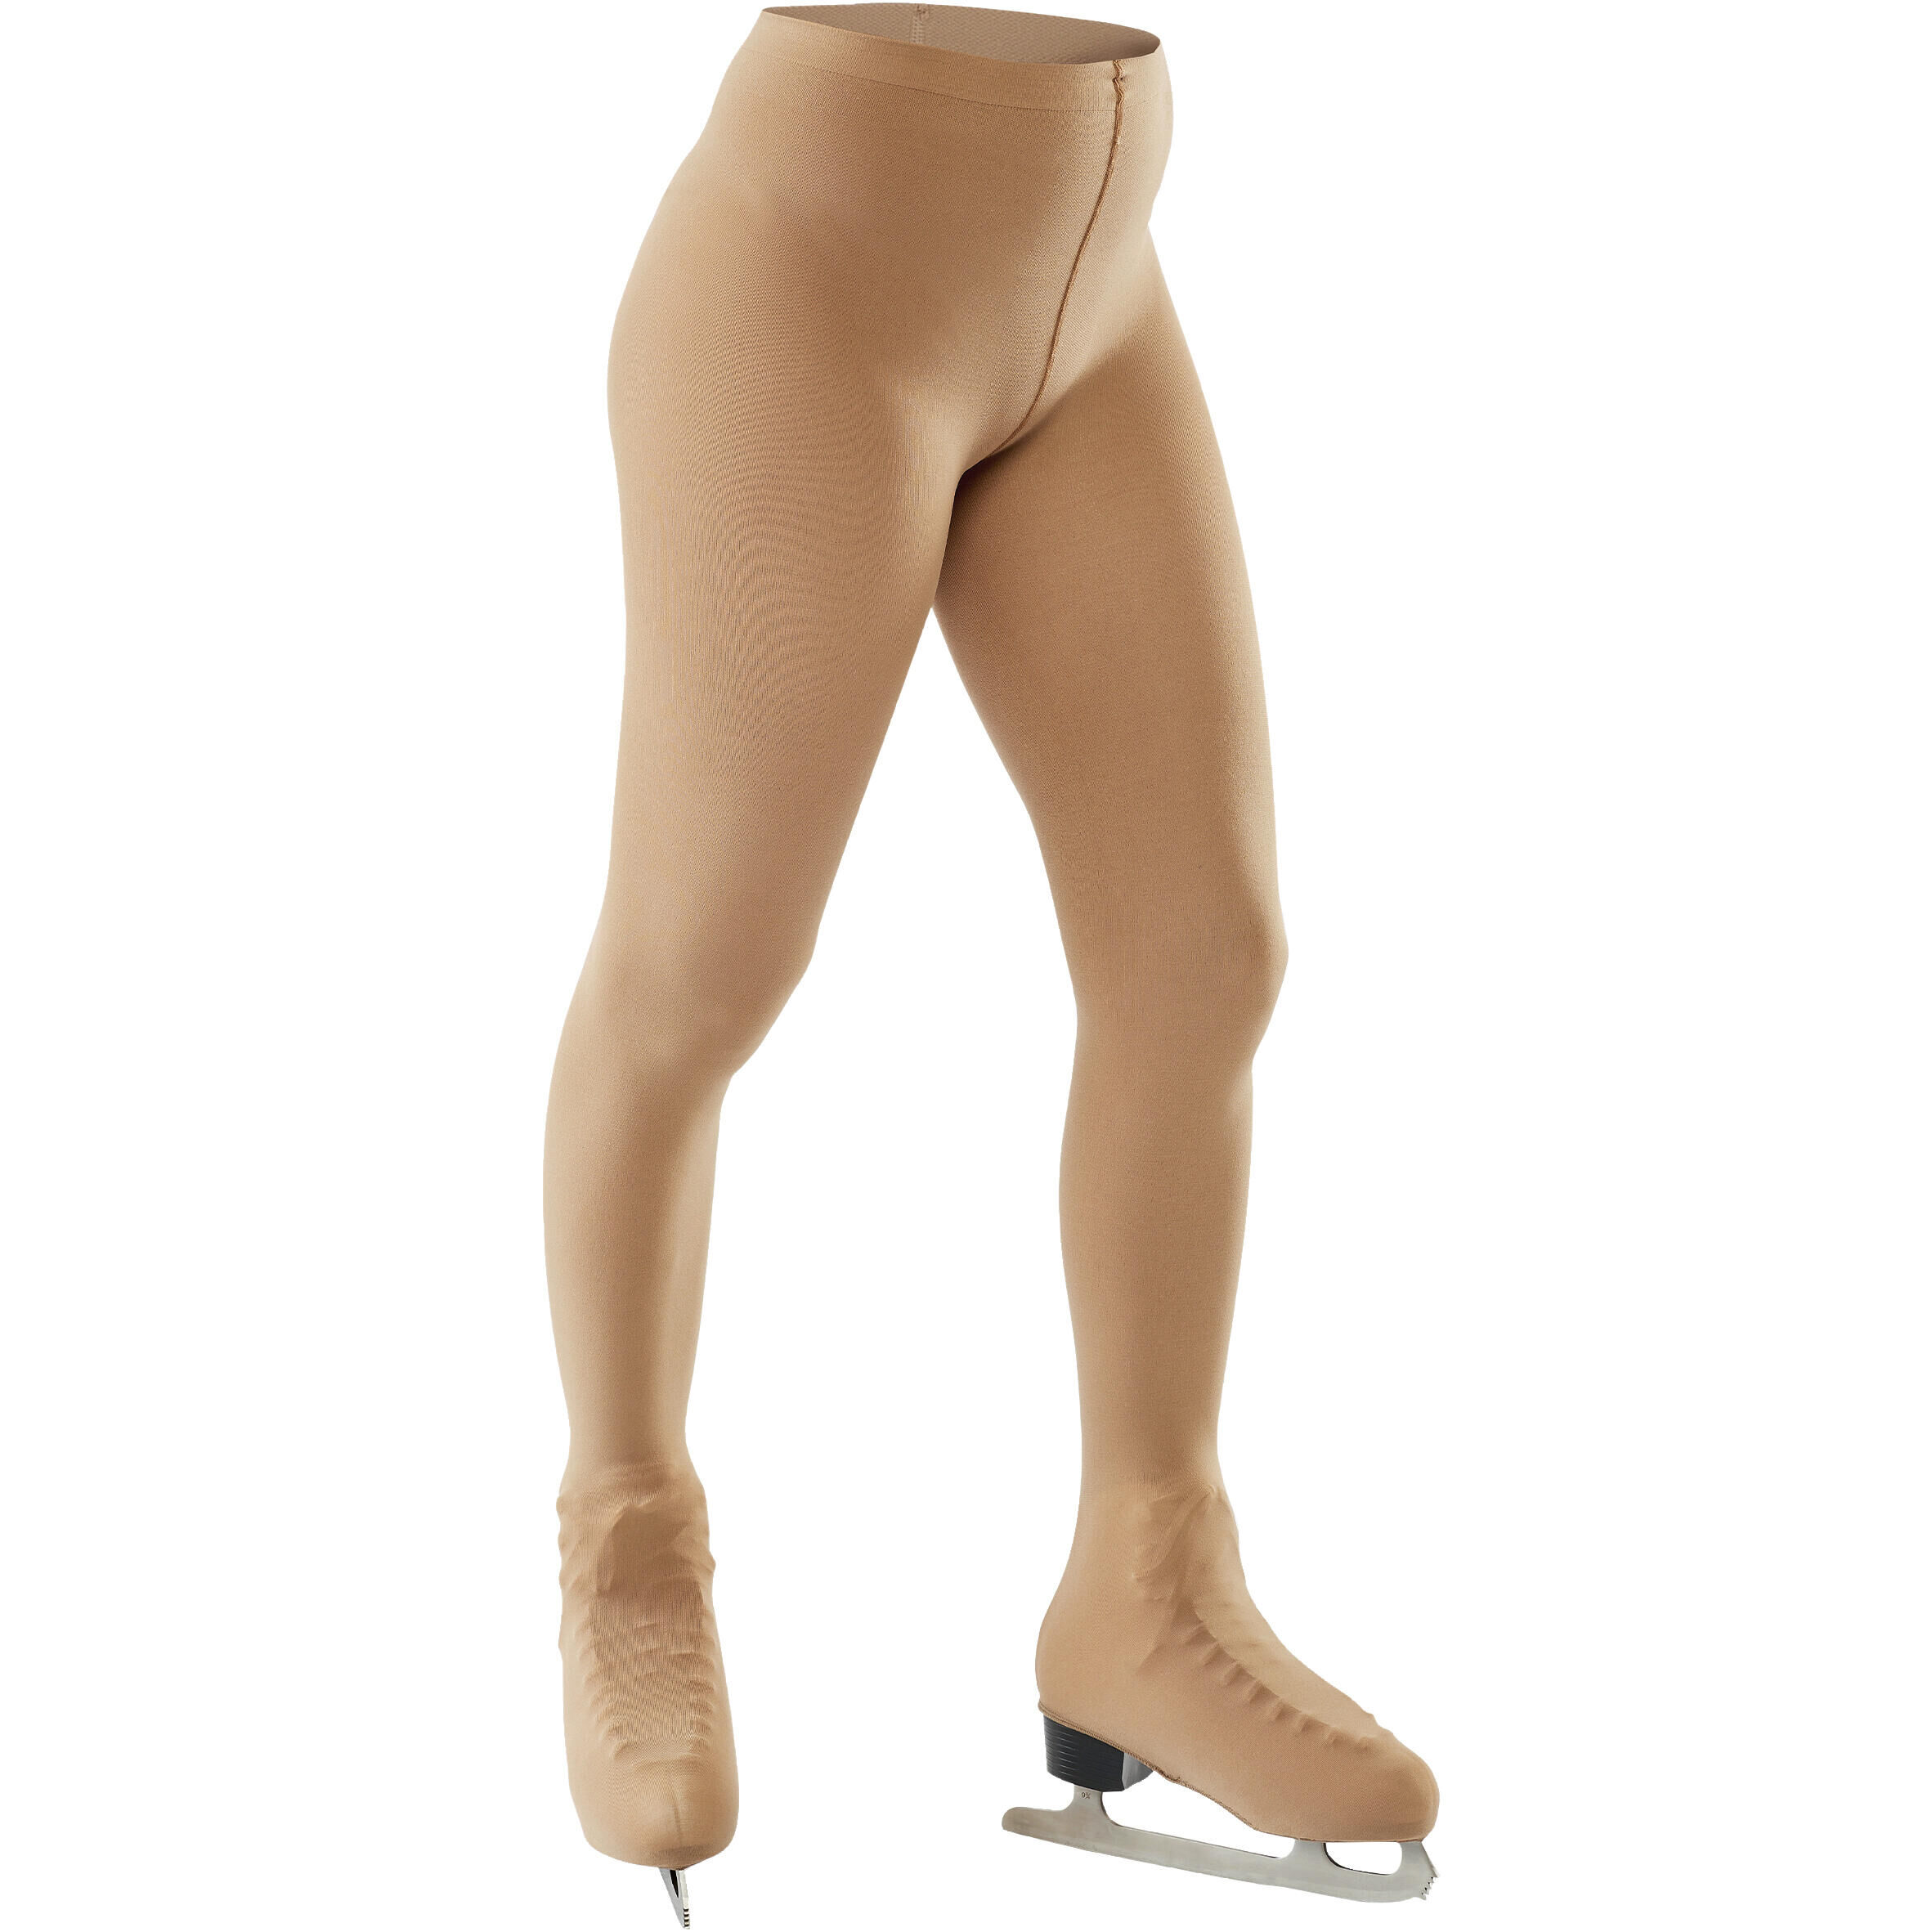 AXELYS Adult Figure Skating Overboot Tights